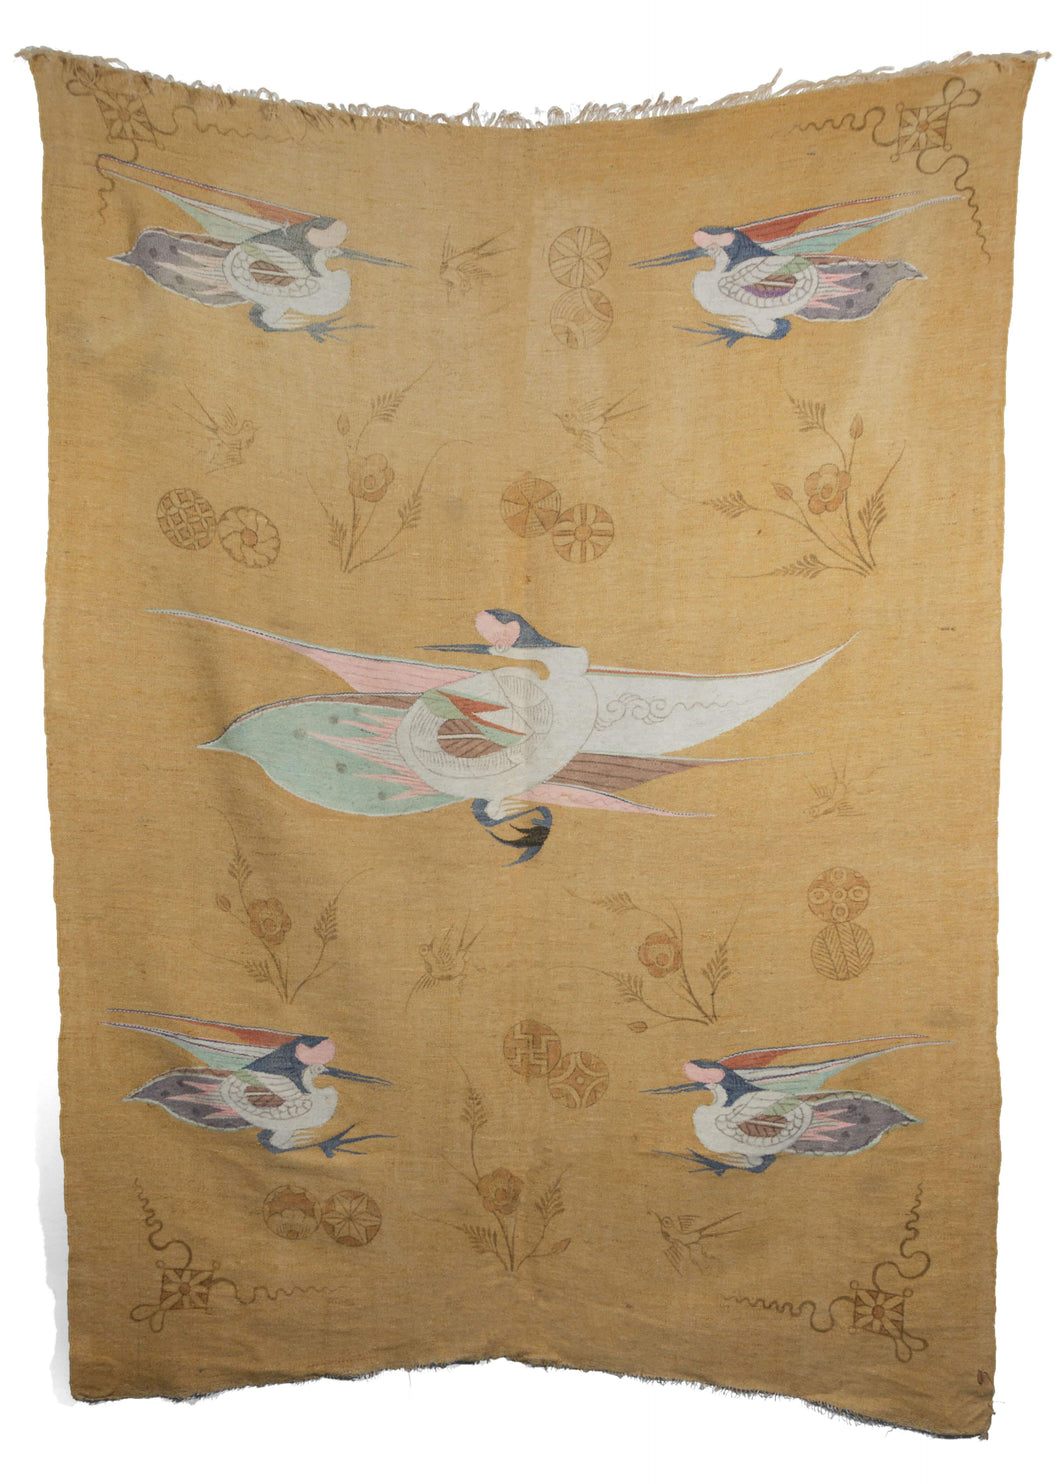 Antique Painted Mongolian Kesi - woven textile featuring cranes woven in pastel colors surrounded by painted plants and symbols in an earthy brown tone